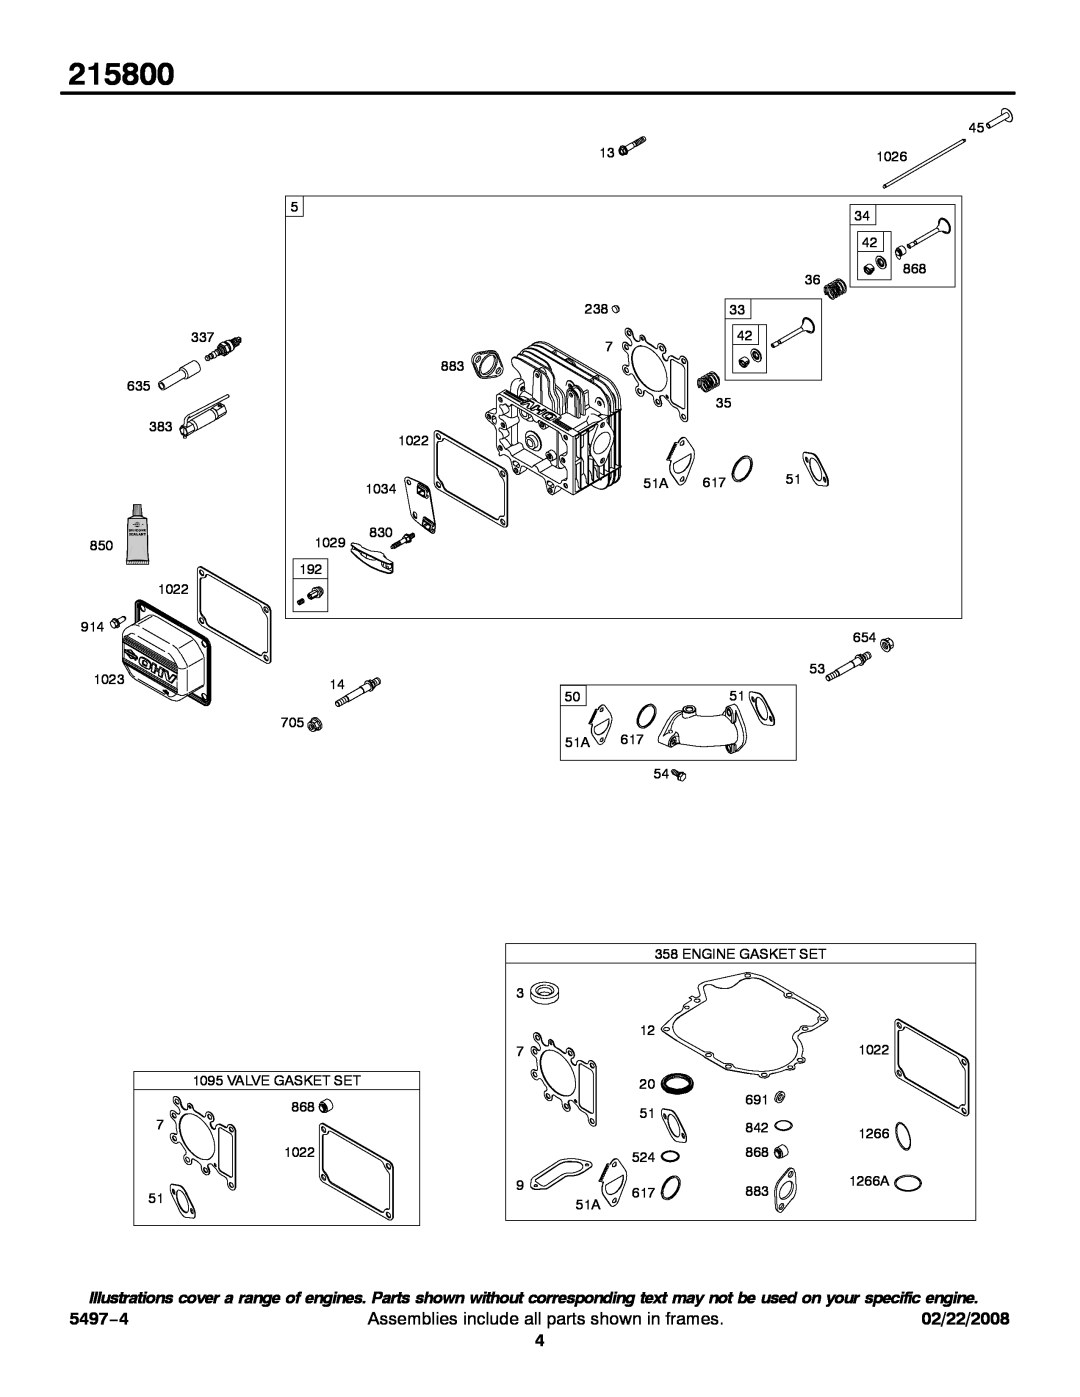 Briggs & Stratton 215800 service manual 5497−4, Assemblies include all parts shown in frames, 02/22/2008 